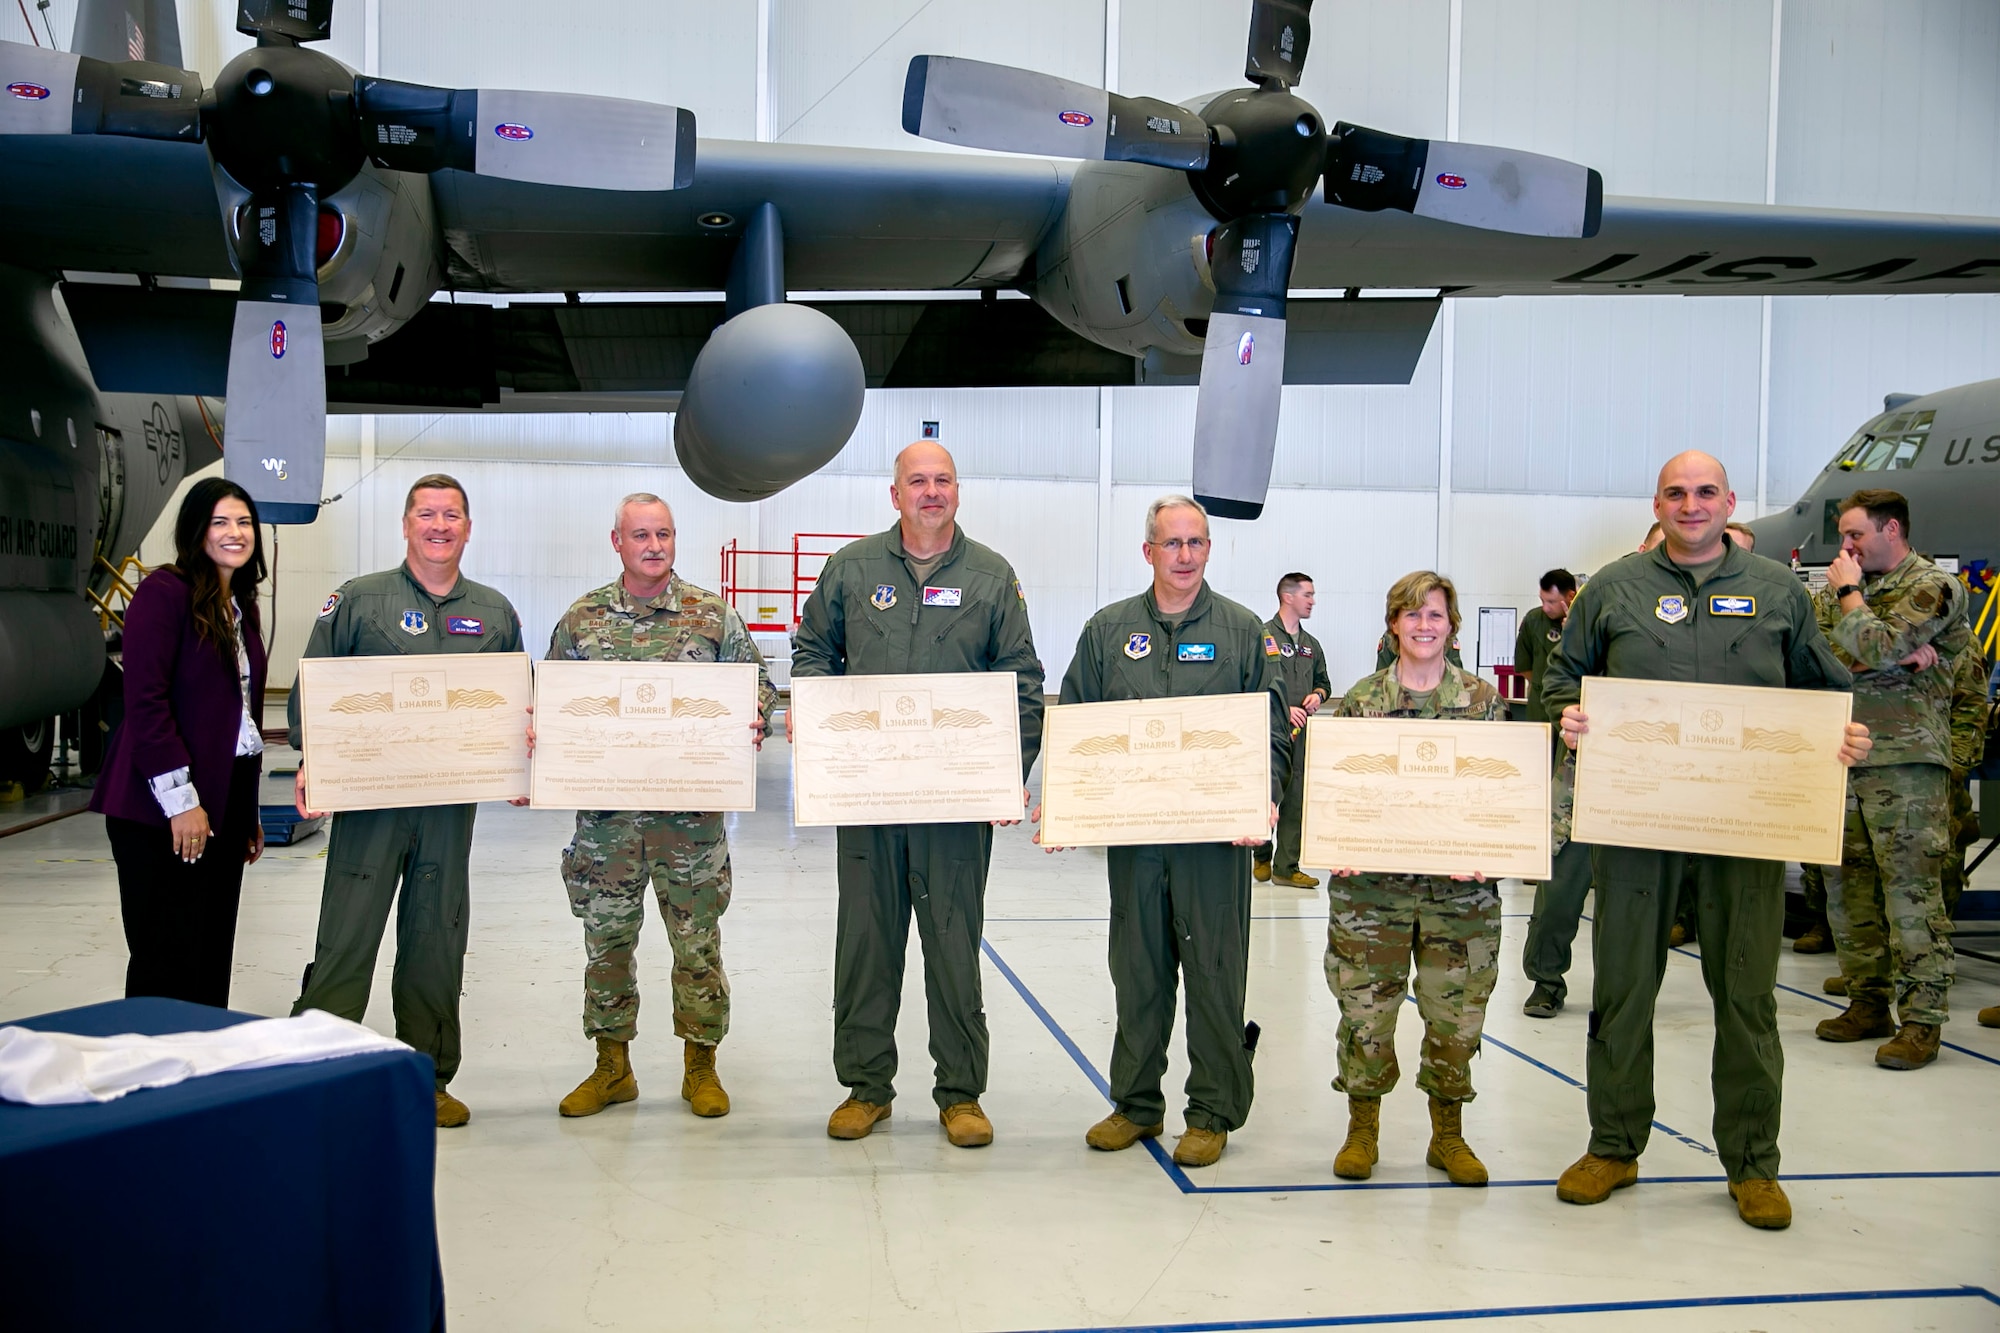 Pictured left to right:  Sara Tatsch (L3H), Col. John Cluck (139th Airlift Wing), Col. Doug Bailey (139th Airlift Wing ), Col. Dean Martin (189th Airlift Wing), Col. Barry Deibert (153rd Airlift Wing), Col. Audrey Kawanishi (ANG Advisor to the Commander), Lt. Col. Tanner (Chief, Airlift Requirements Division, AMC) during a ribbon cutting ceremony earlier this month to mark the completion of the first Trial Kit Installation onto a C-130H from the 139th Airlift Wing. (Courtesy photo)